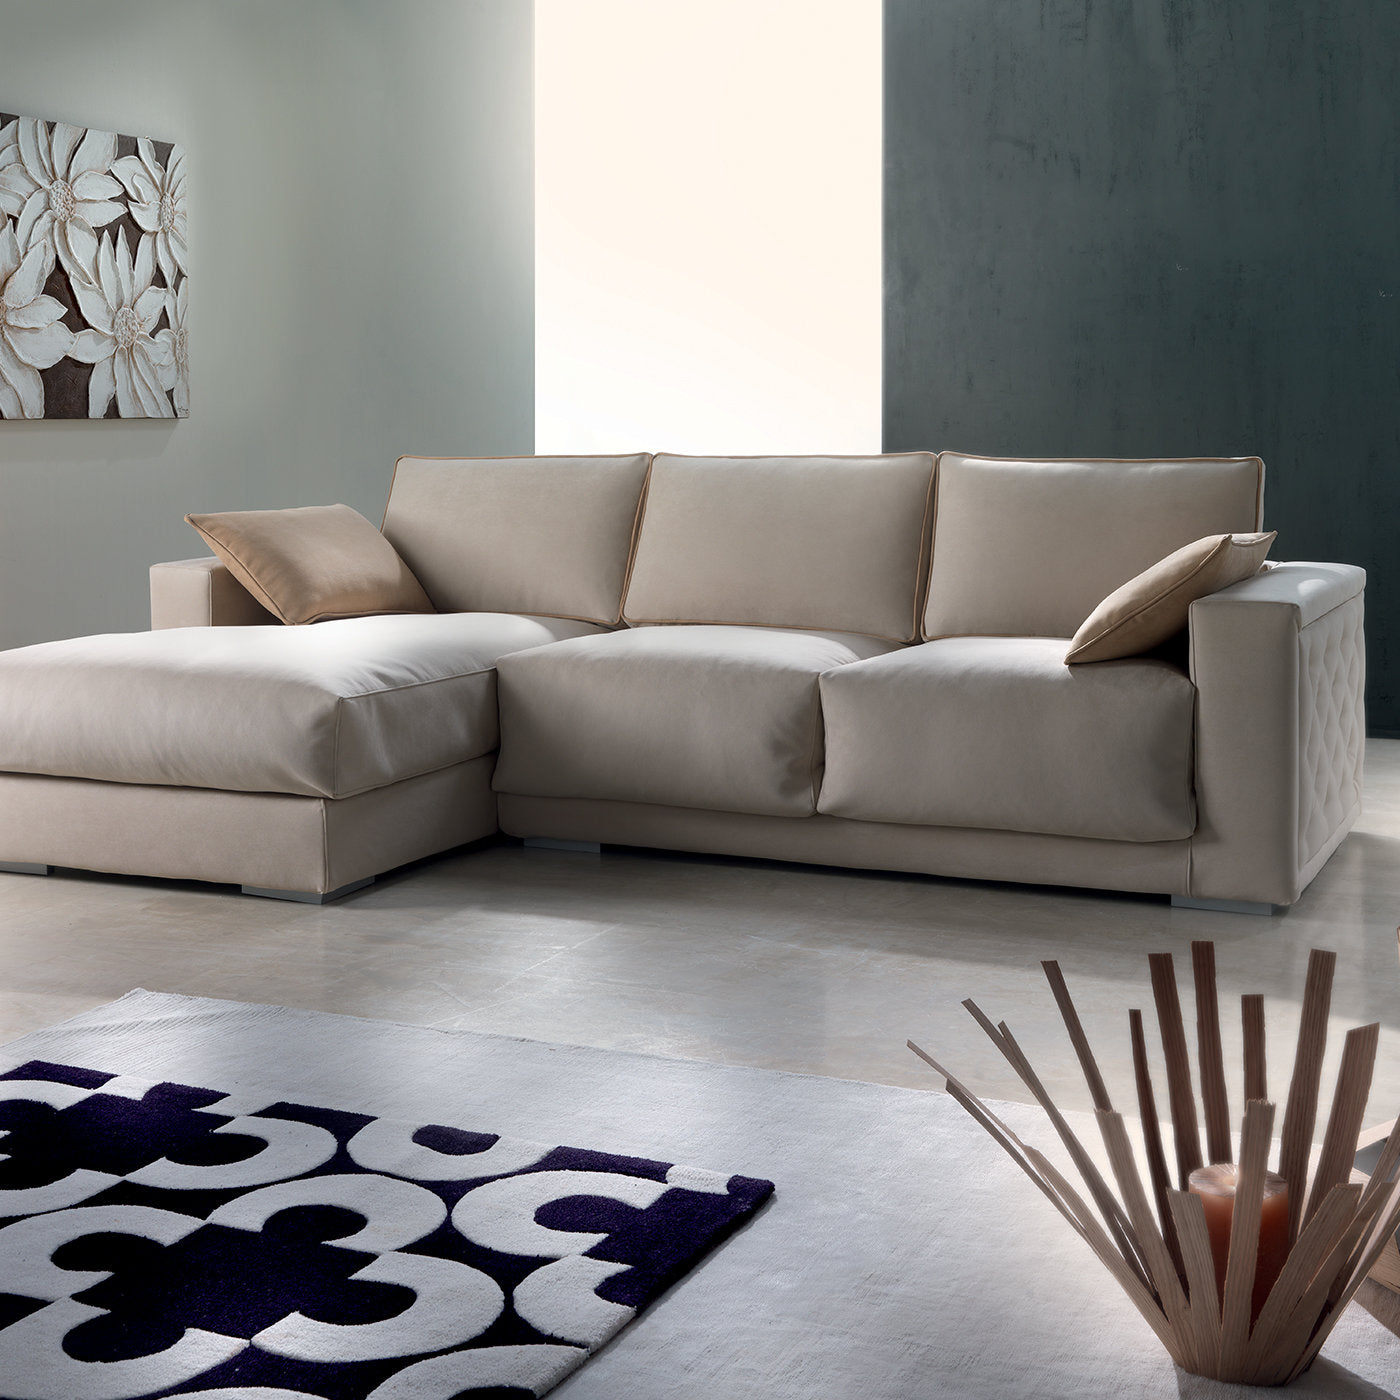 Sofa with Chaise Longue - Alternative view 1